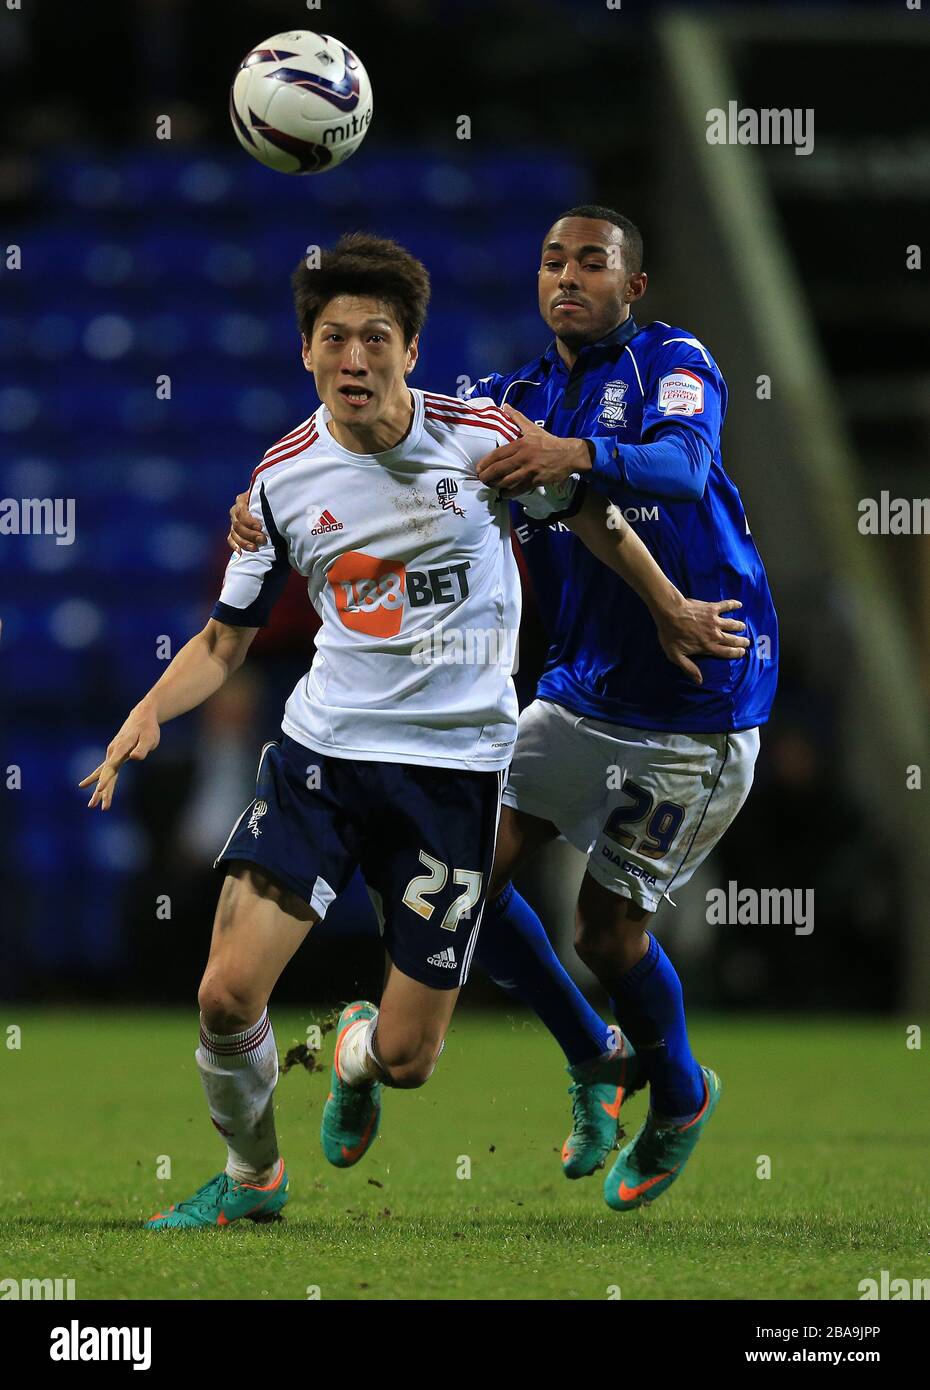 Bolton Wanderers' C.Y Lee (left) and Birmingham City's Robbie Hall (right) battle for the ball Stock Photo